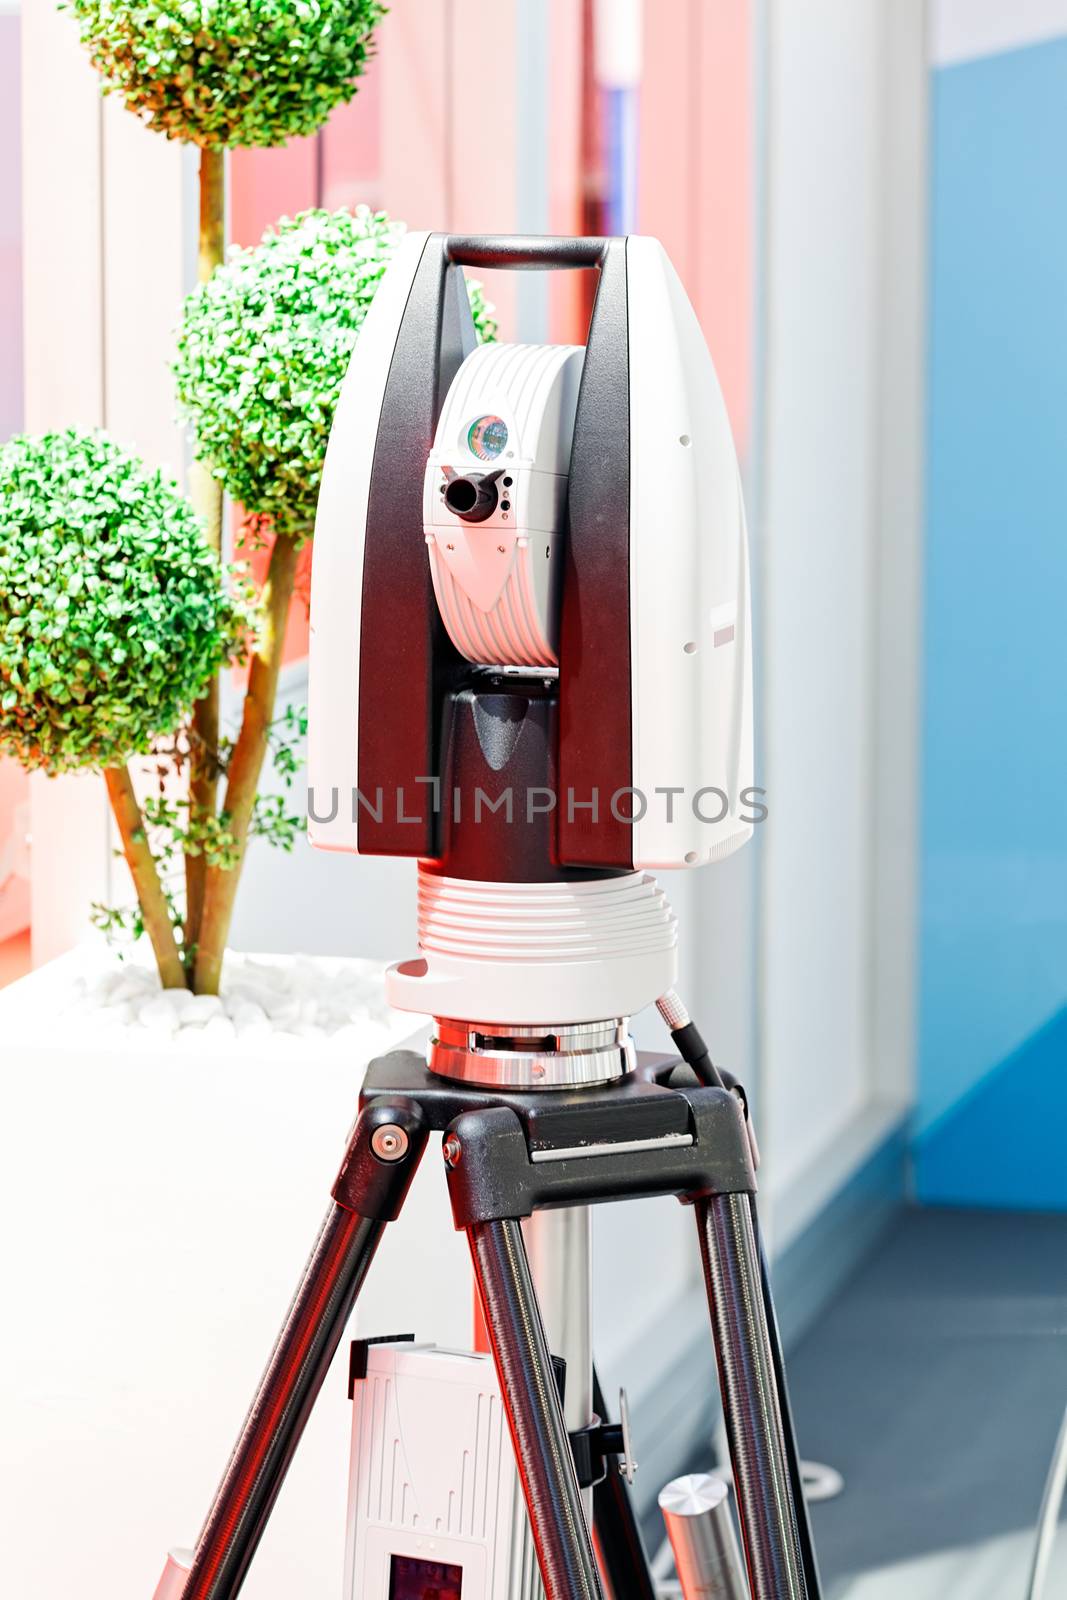 Design of advanced technology engine on the exhibition show; note shallow depth of field